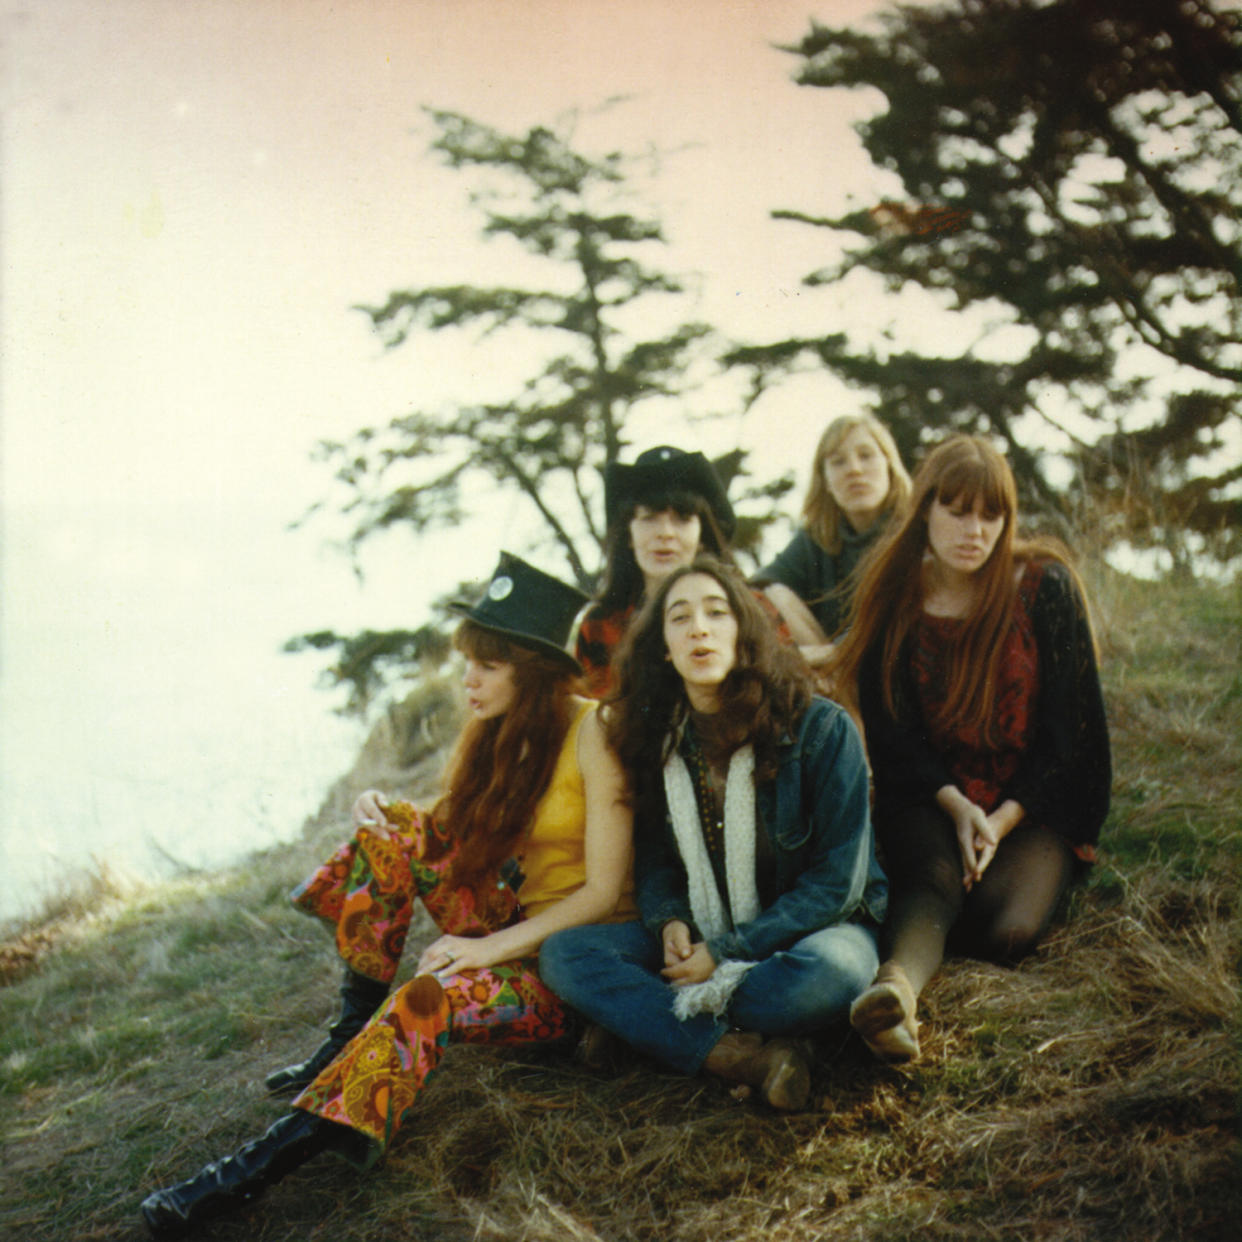 Ace of Cups on Mount Tamalpais in Northern California, 1967 (clockwise from bottom left): Vitalich, Gannon, Simpson, Hunt and Kaufman. - Credit: Casey Sonnabend*